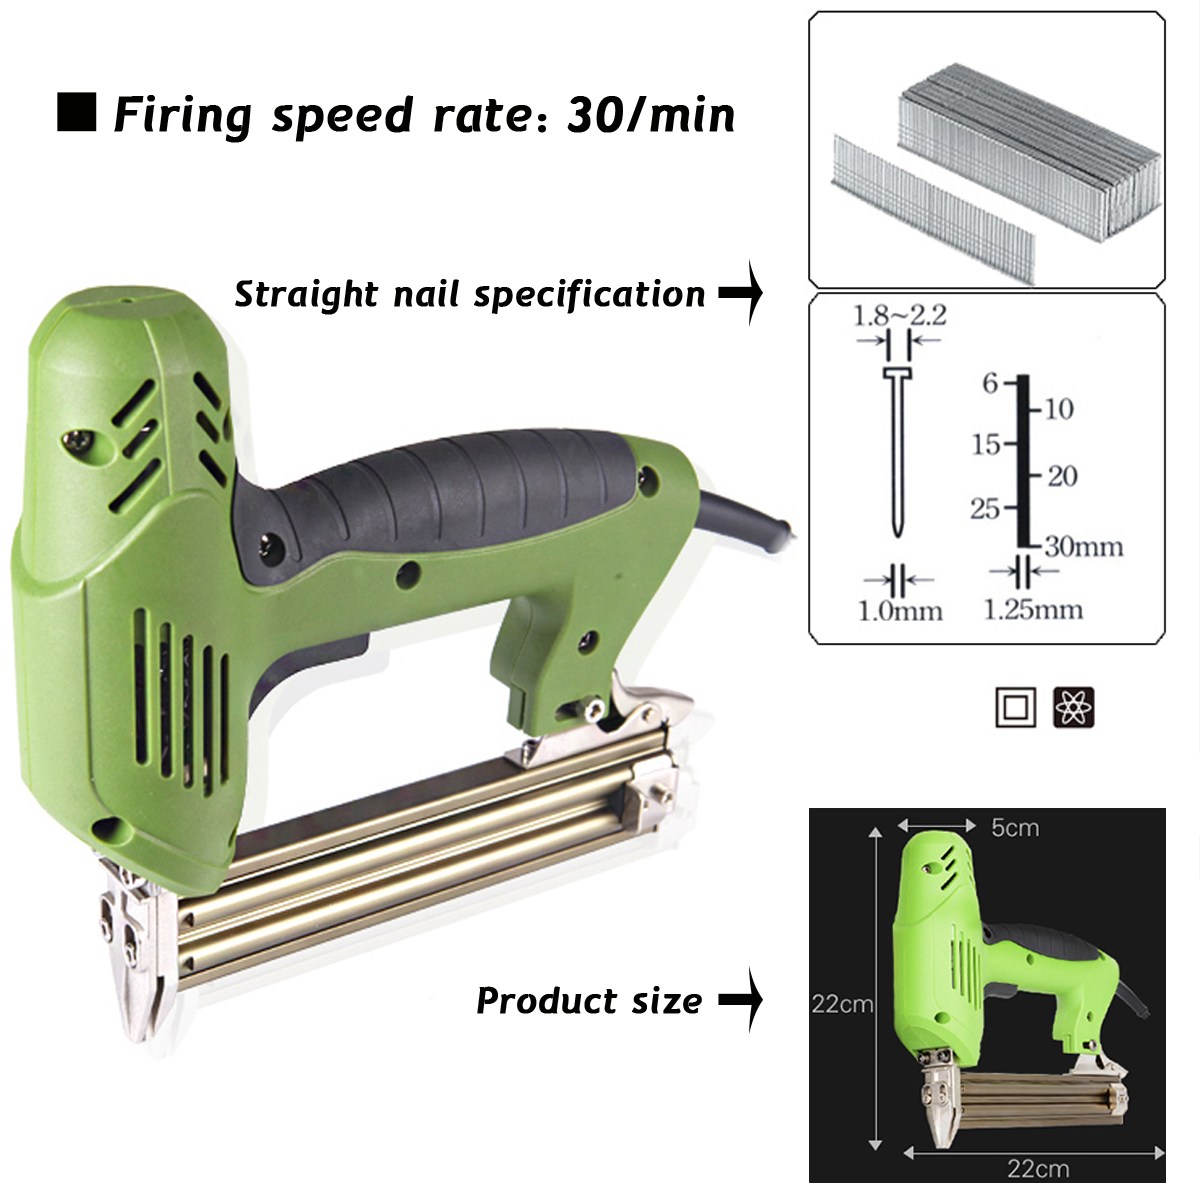 220V-1800W-Electric-Staple-Straight-Electric-Staple-Straight-Nail-Guns-10-30mm-Special-Use-30min-Woo-1192232-6